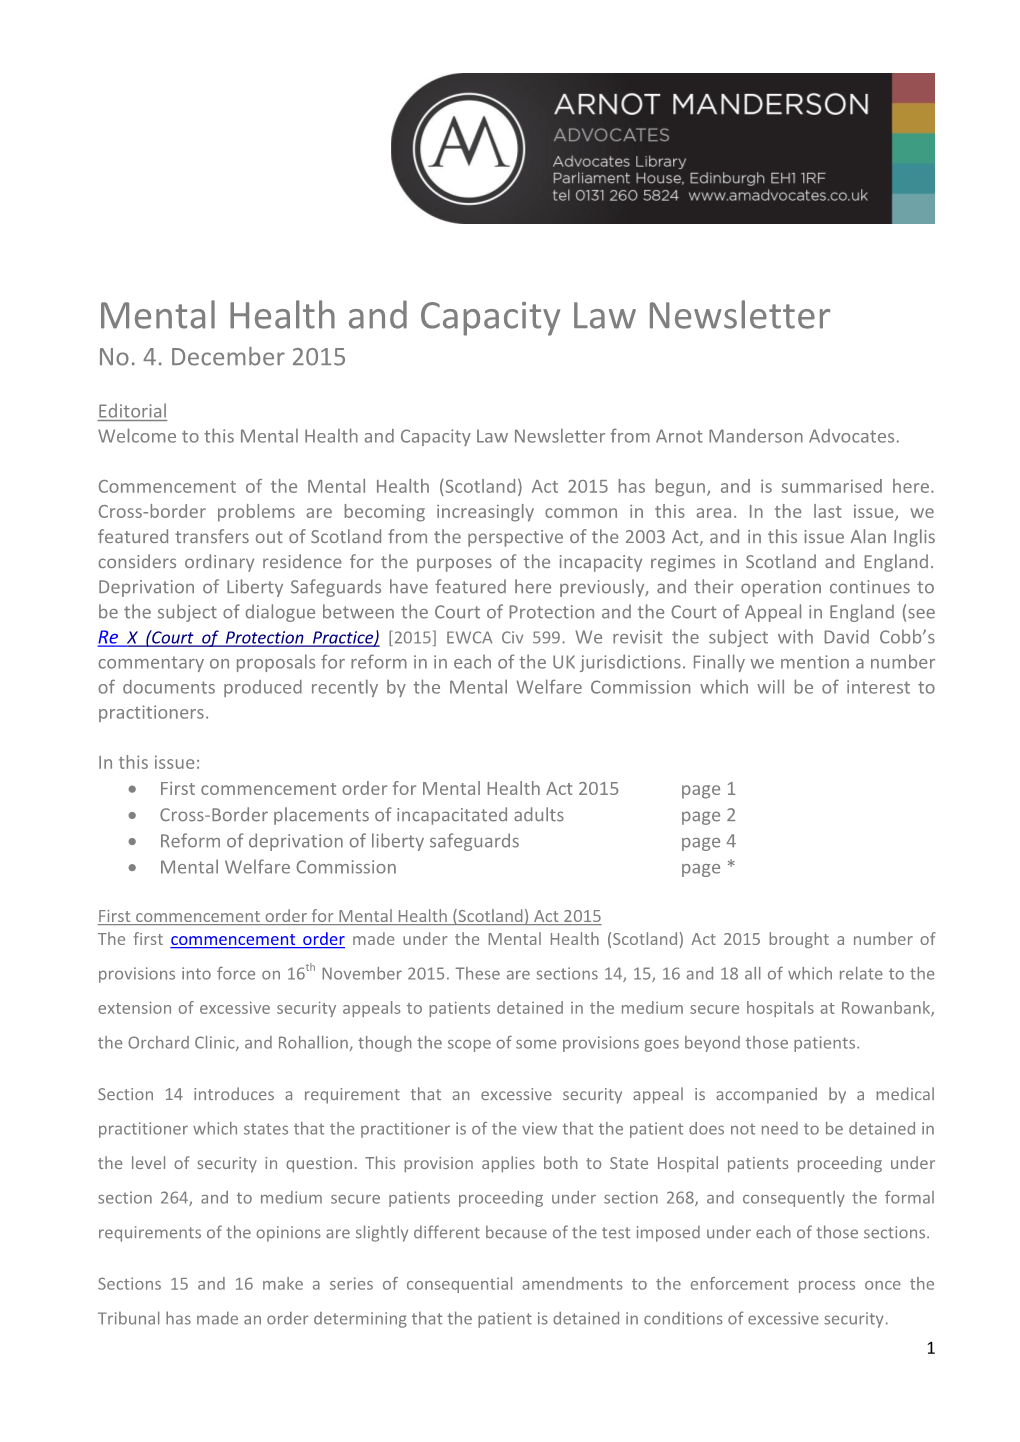 Mental Health and Capacity Law Newsletter No